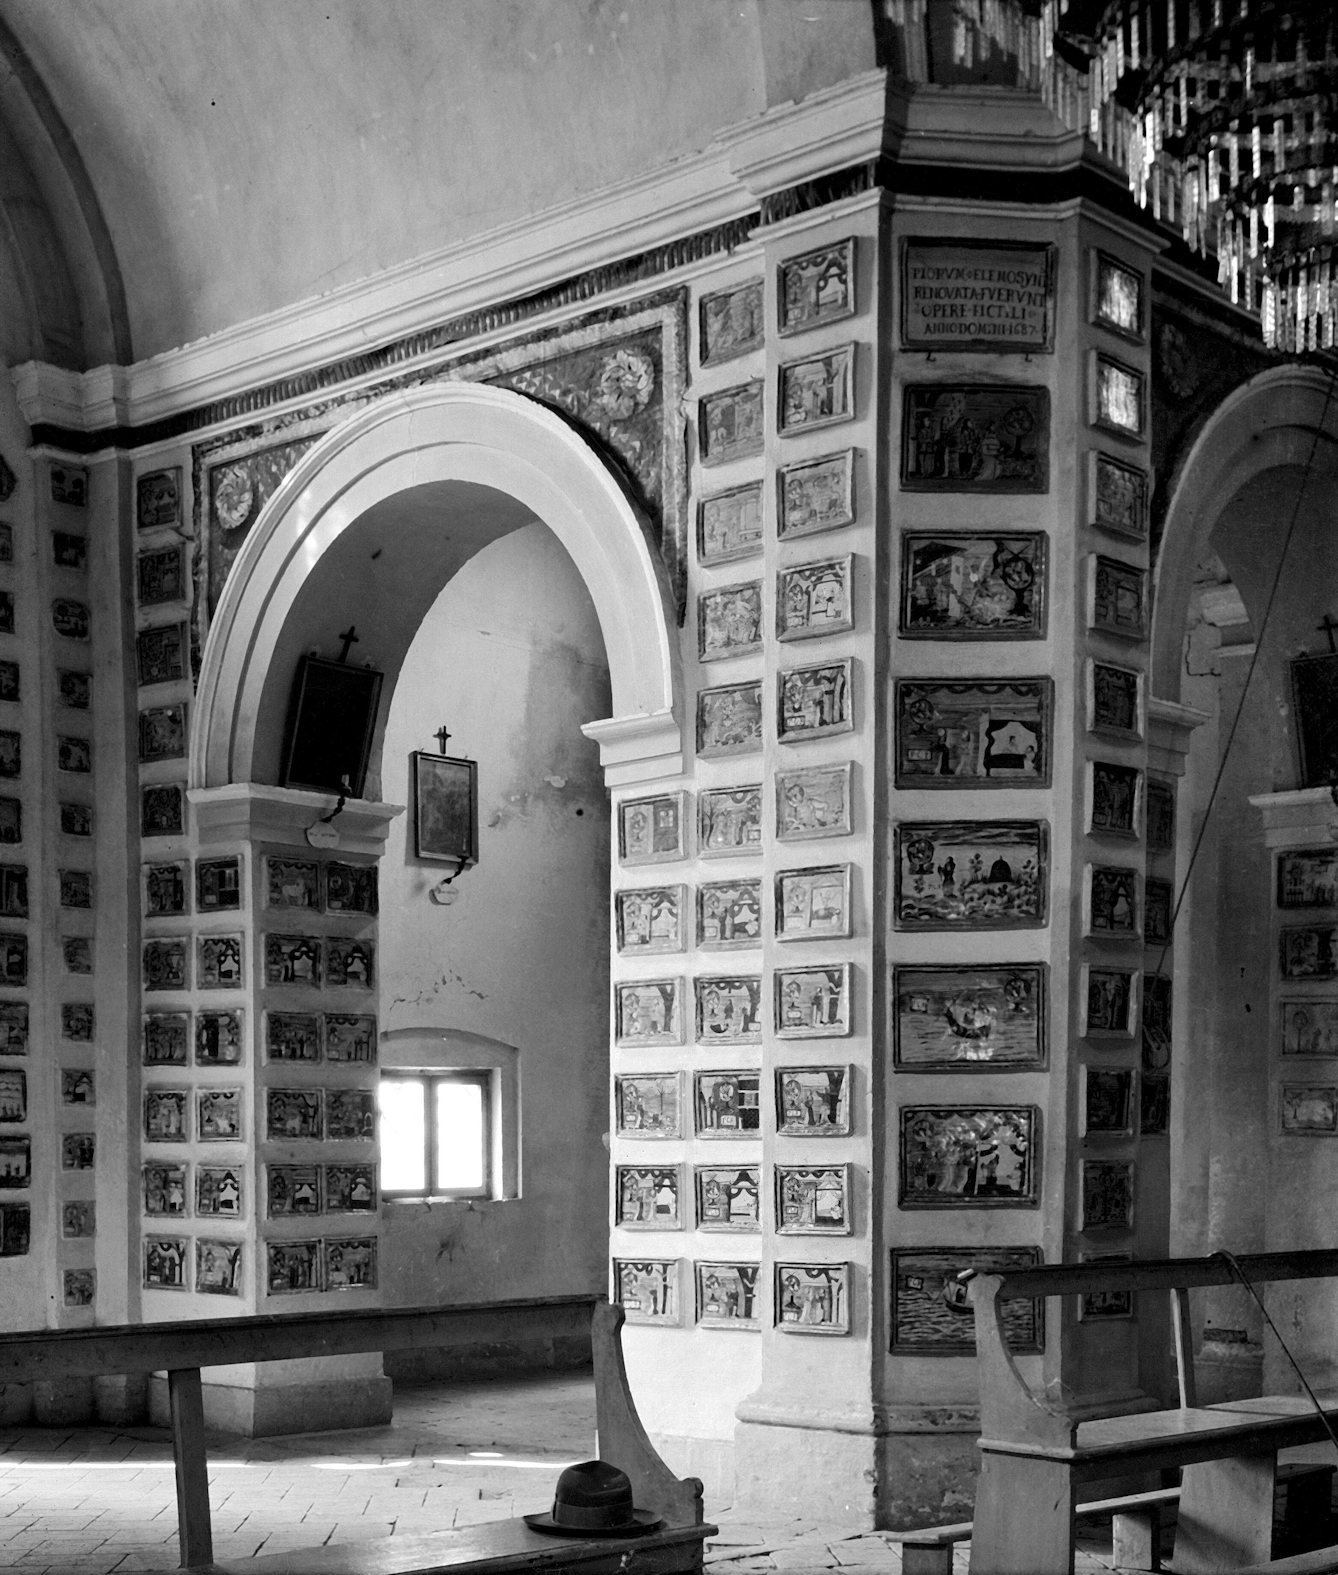 Photograph of votive tablets (ex-voto paintings) in the Church of Santa Marie de Bagni. Deruta. The image shows an archway door leading to another room and surrounding walls which are covered in votive tablets with paintings and text upon them. In front of the archway are several church pews and on the ceiling is a chandelier. 